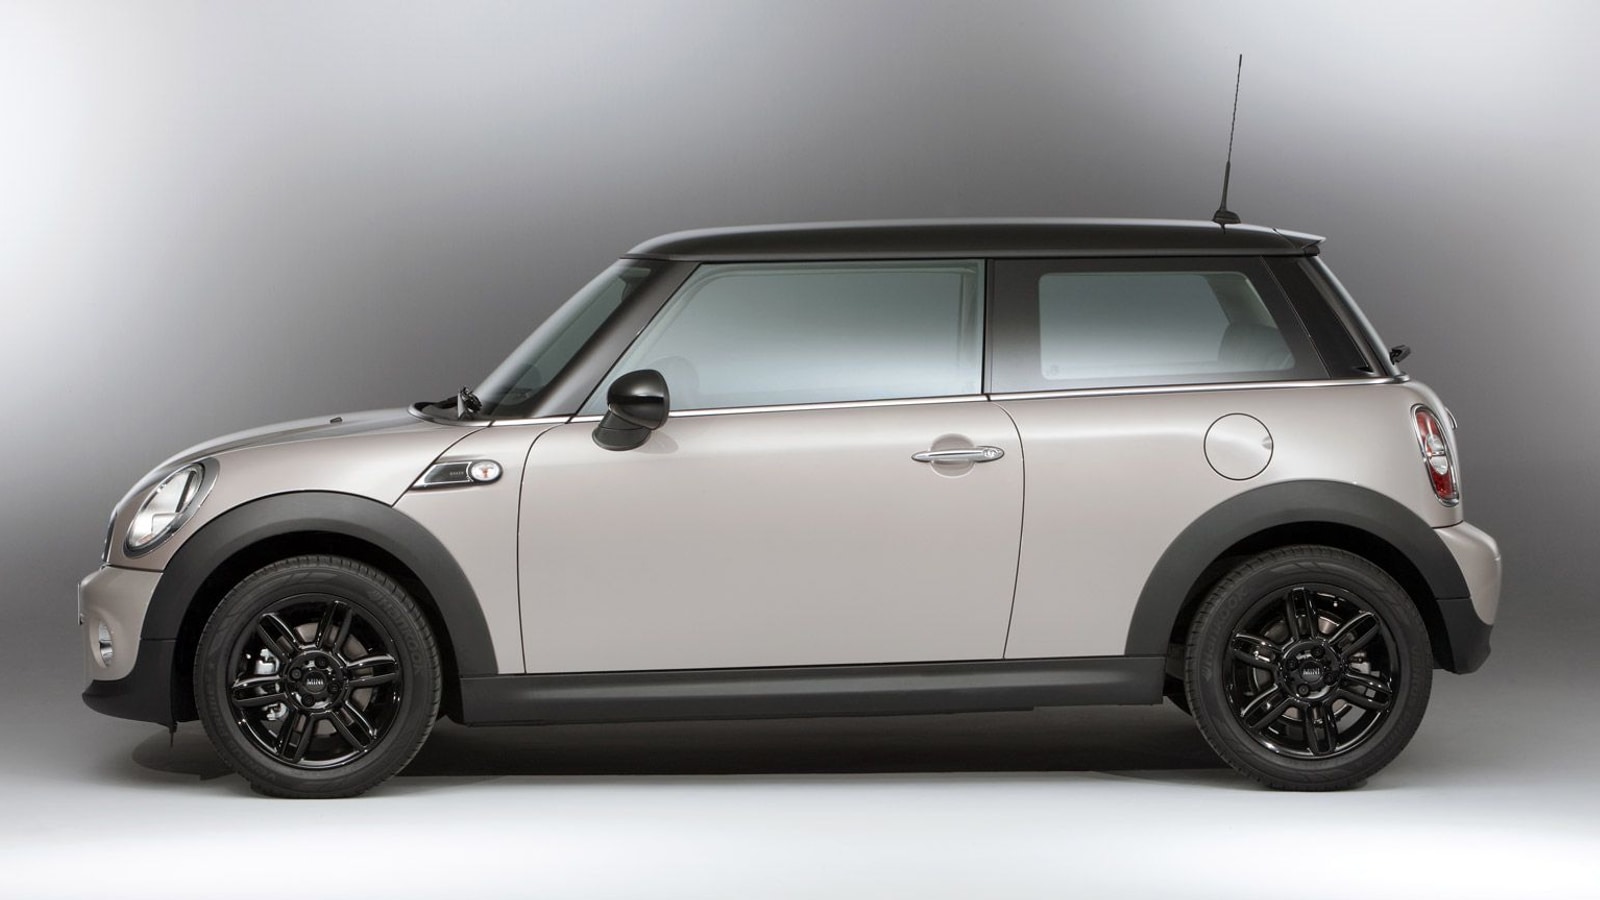 2012 MINI Bayswater special edition